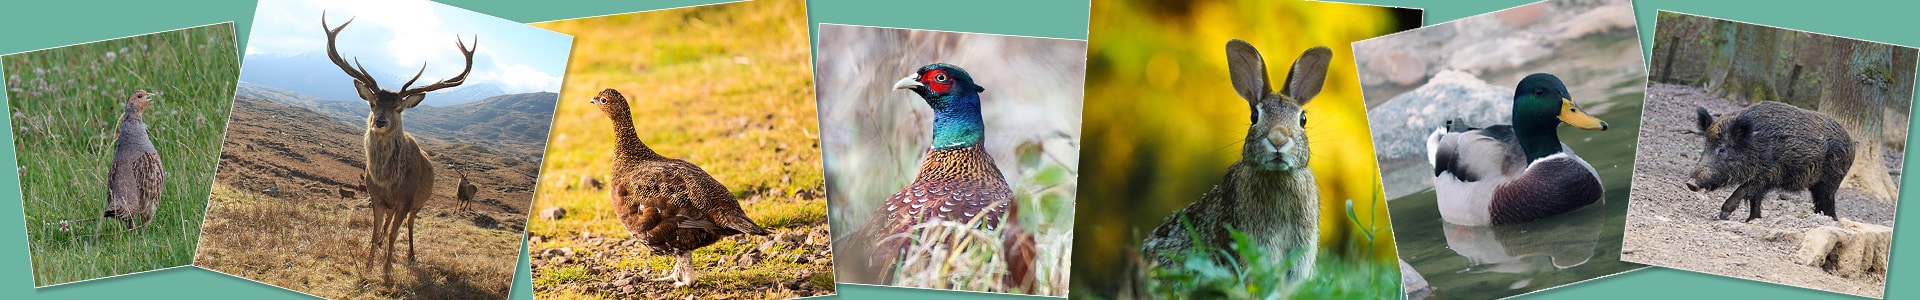 BASC species of the month banner